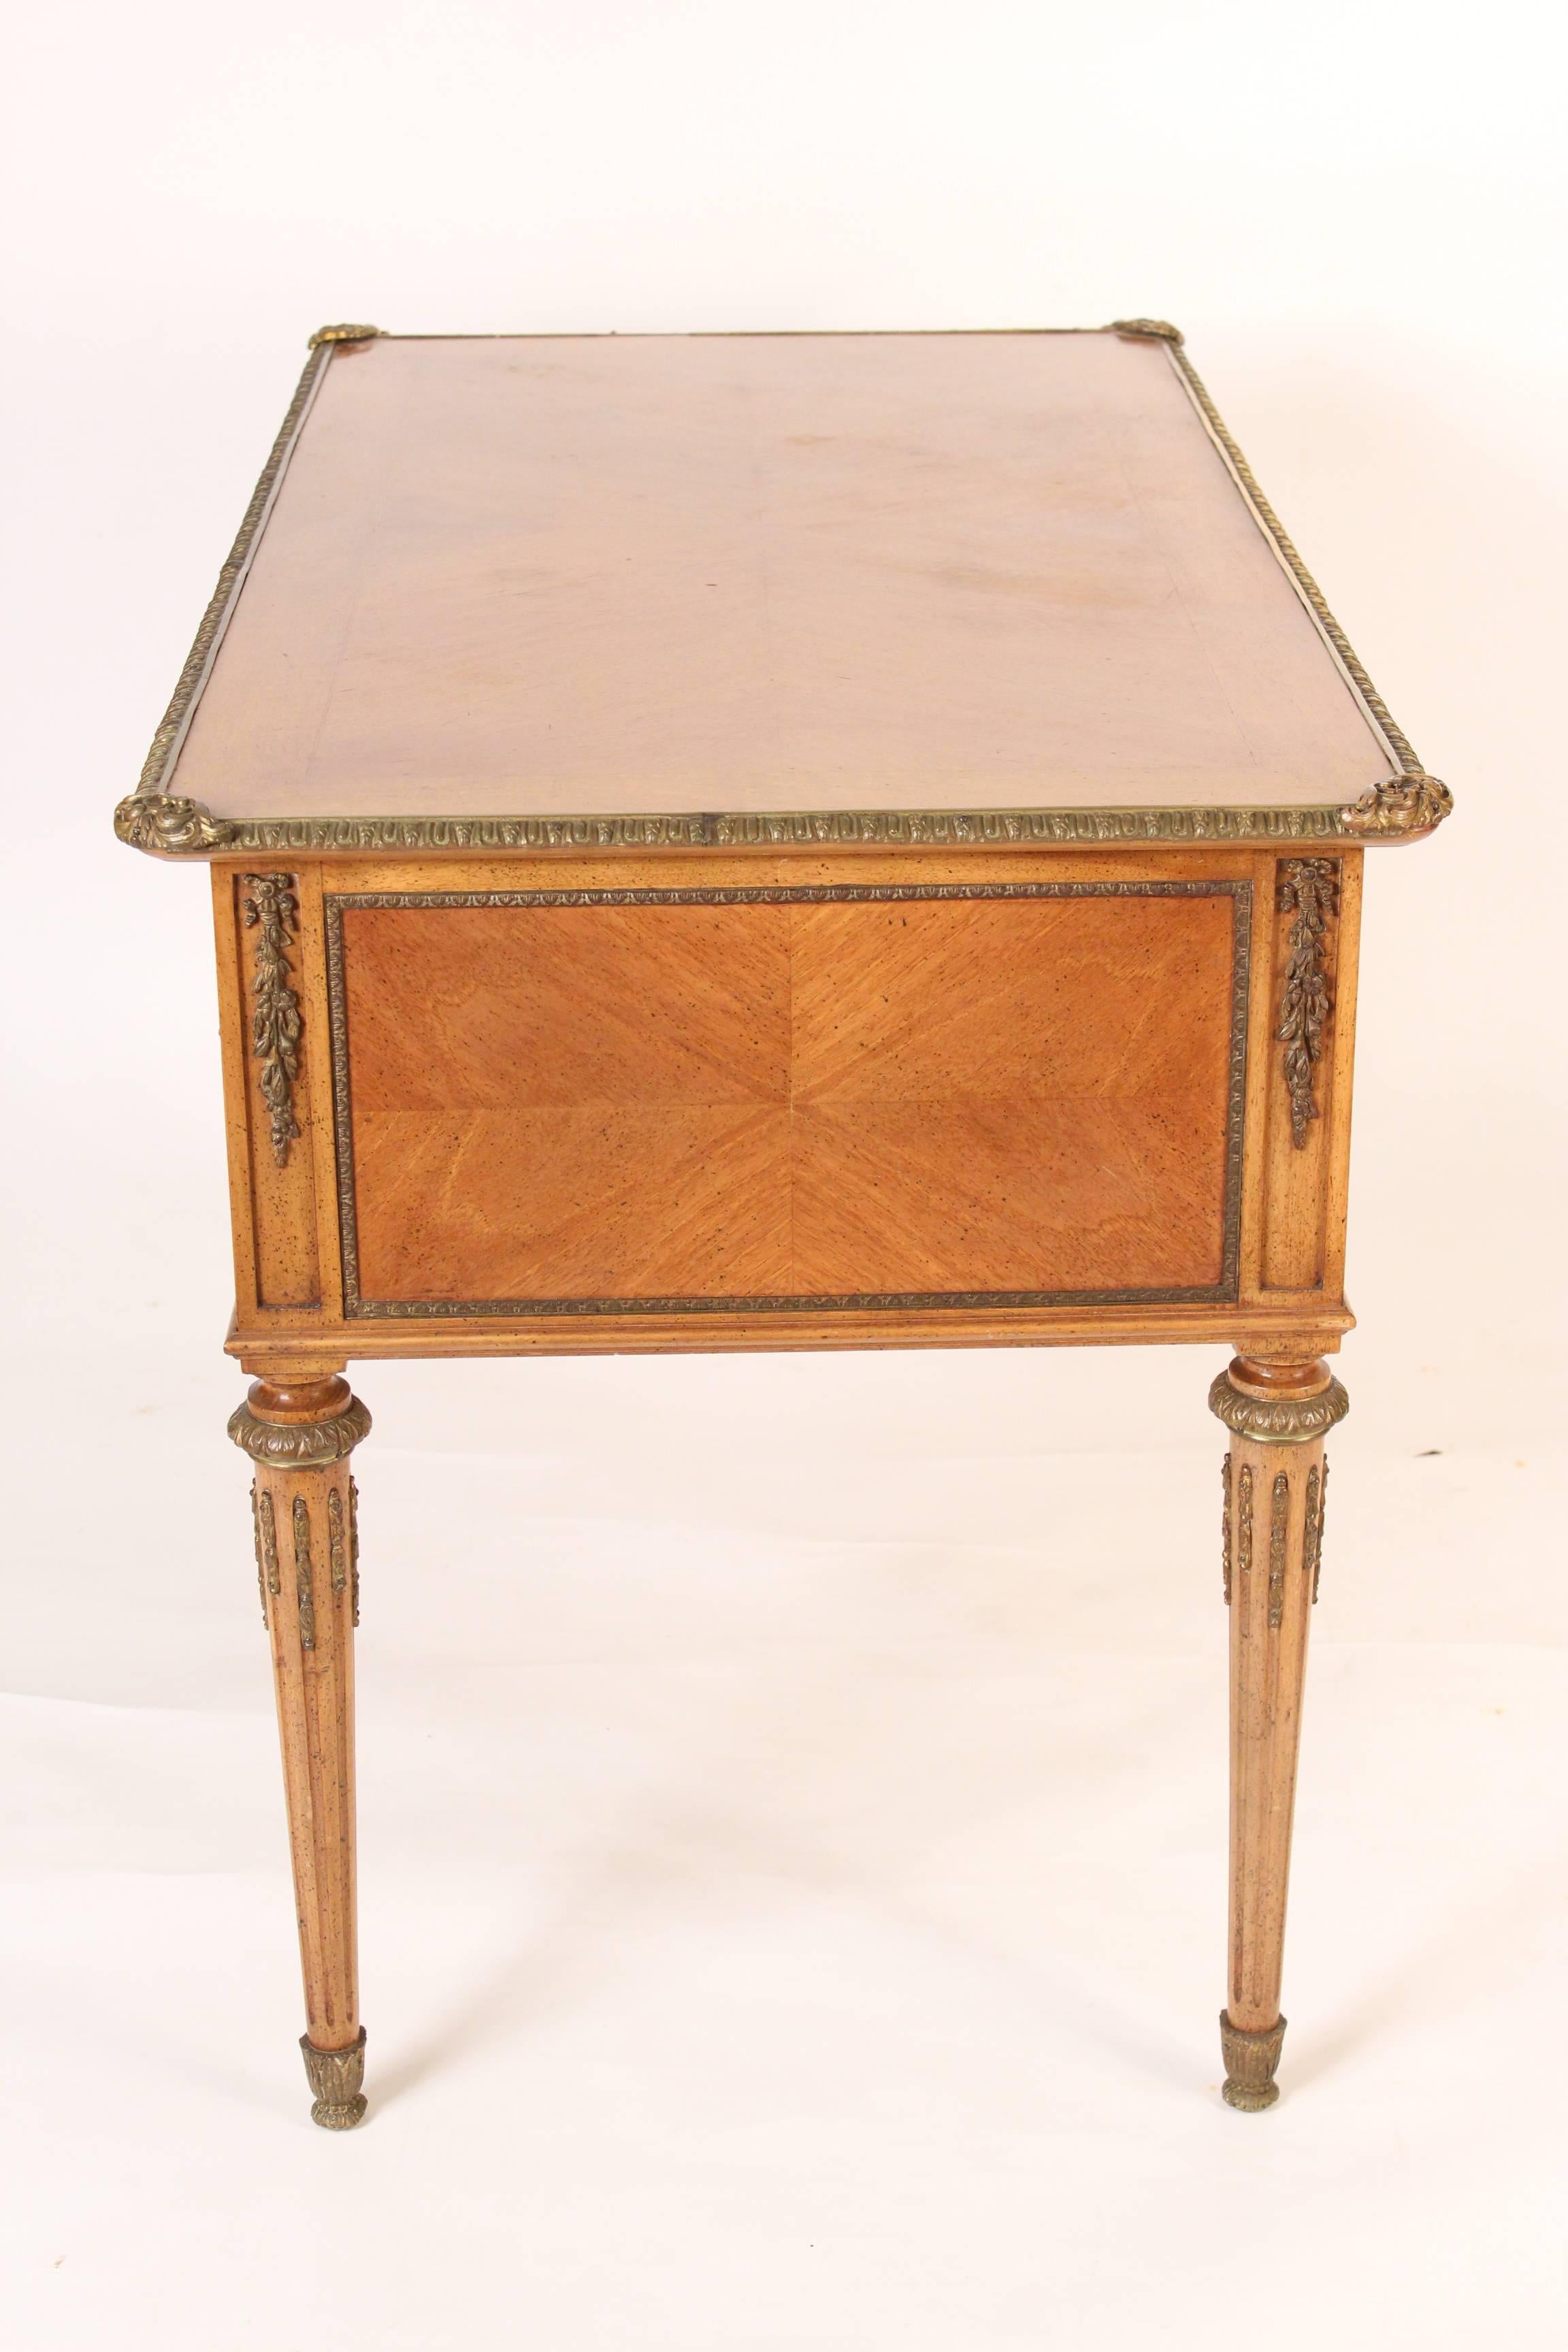 Louis XVI style bronze-mounted desk, probably made in Spain, circa 1960s.